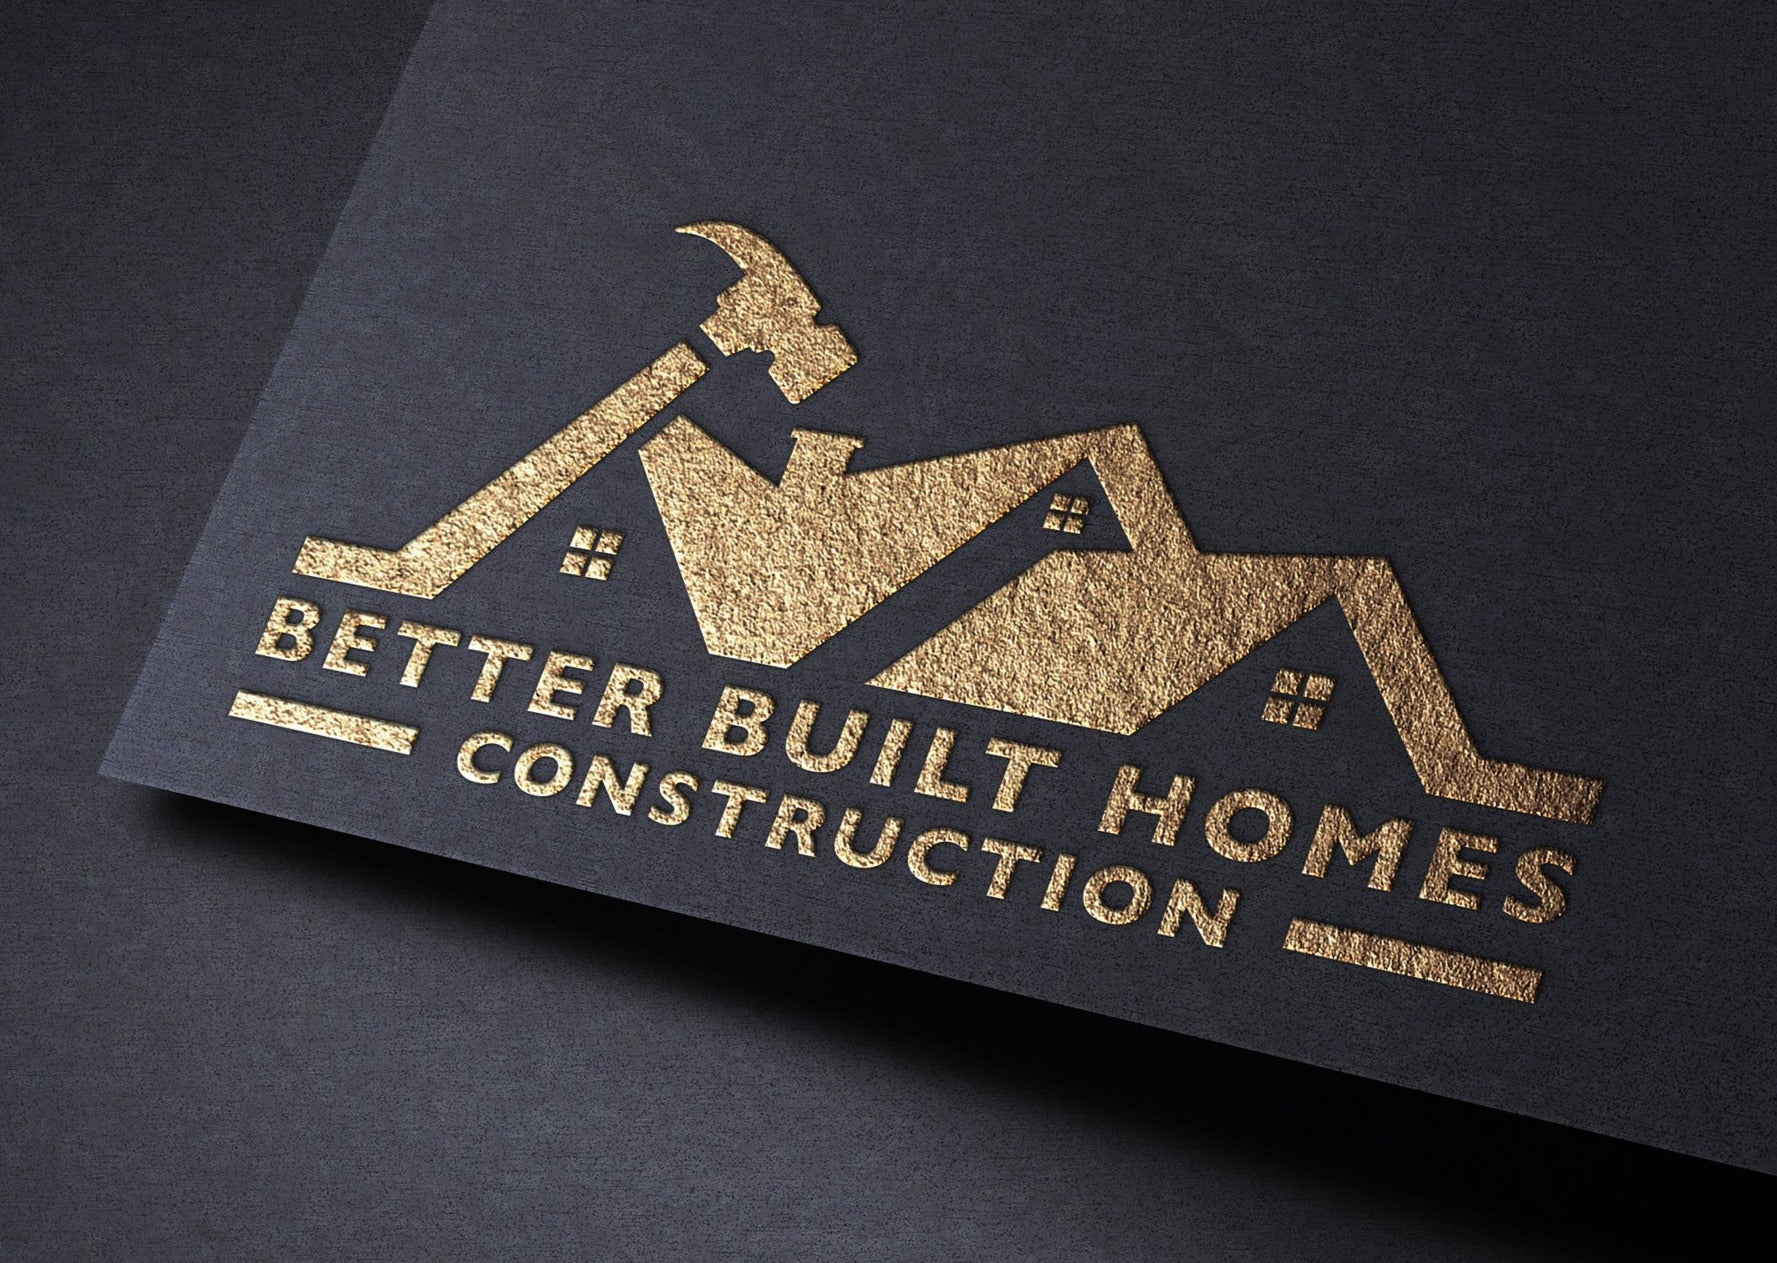 Construction Logo Design | Hammer Design | Roofing Business | Handyman Services | Construction Company | Architect | Roofer | Home Repair